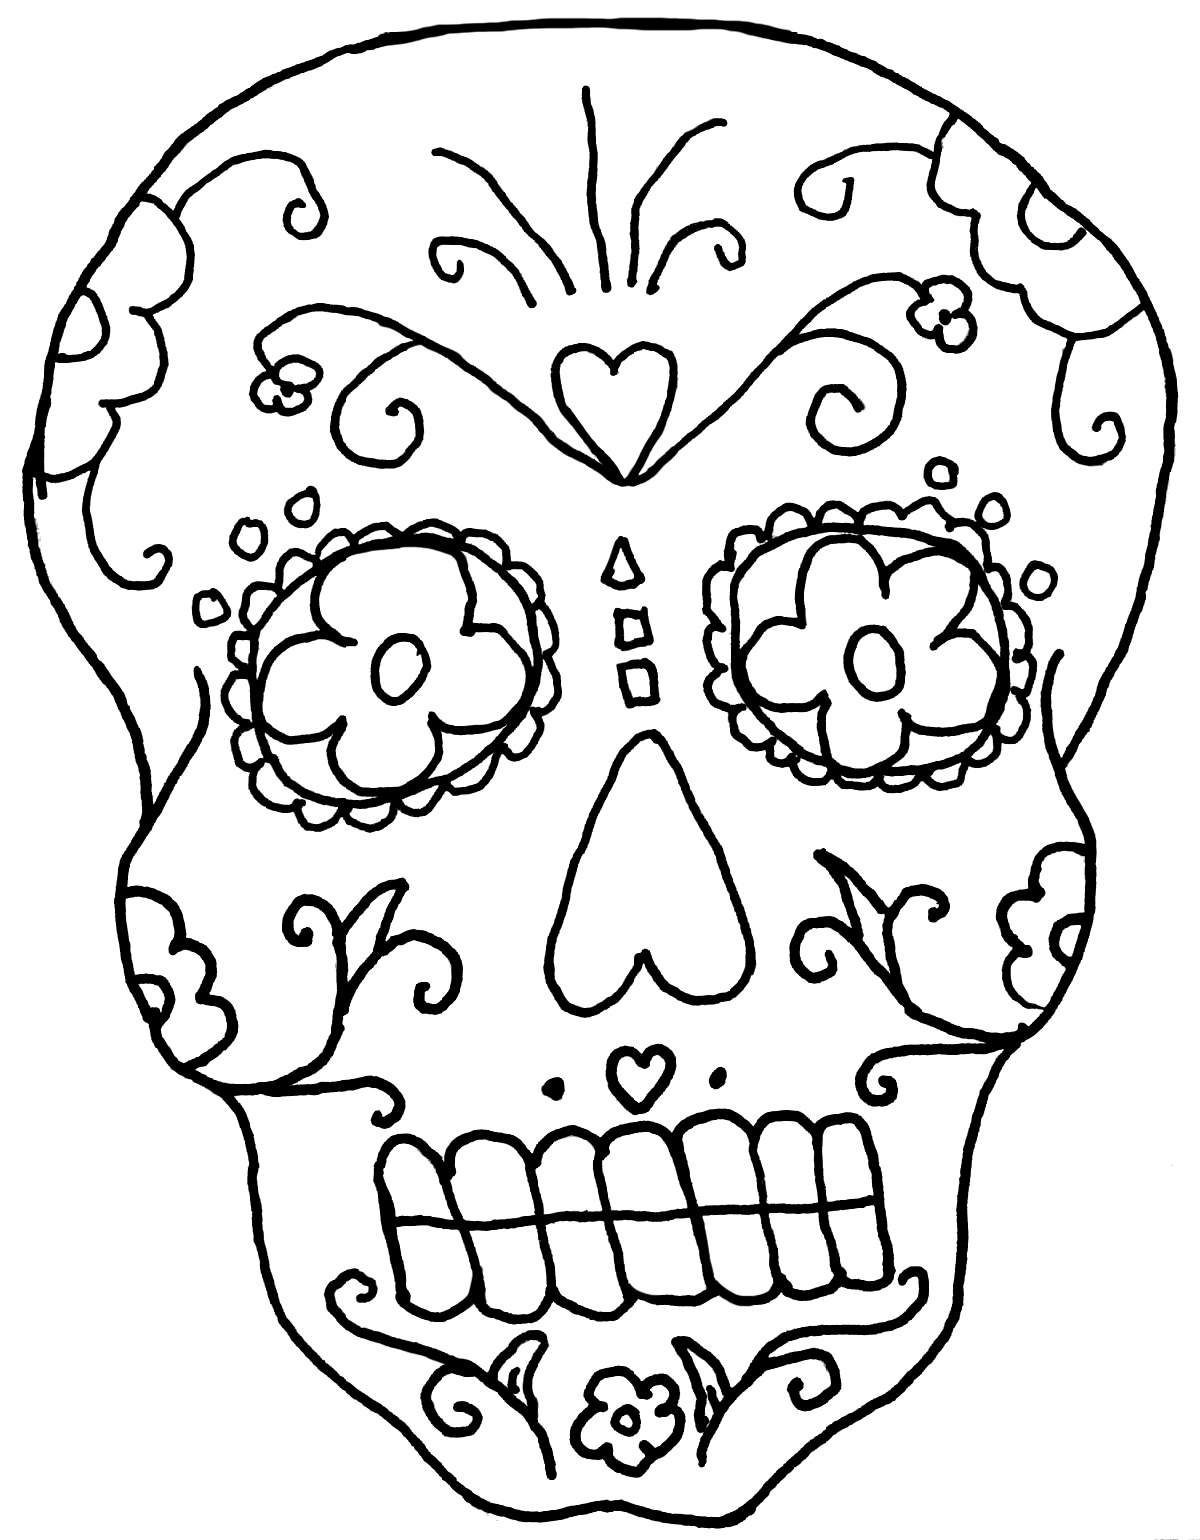 Free Printable Day Of The Dead Coloring Pages - Best Coloring Pages - Free Printable Day Of The Dead Coloring Pages